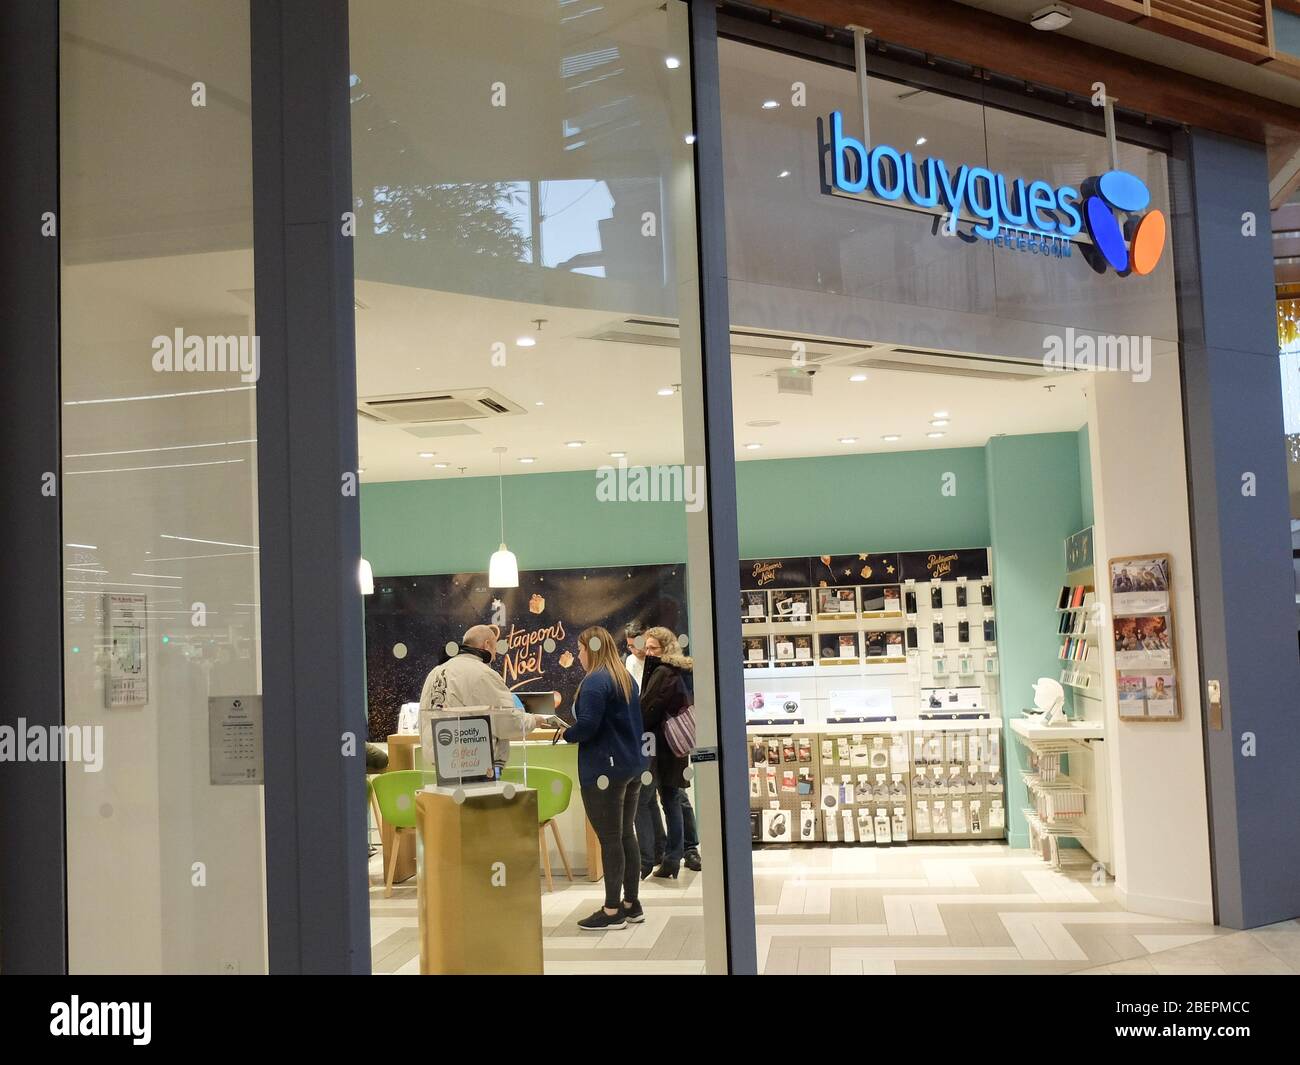 Bouygues Telecom storefront. Bouygues Telecom is a French telecommunications operator, a subsidiary of the Bouygues group created in 1994 Stock Photo